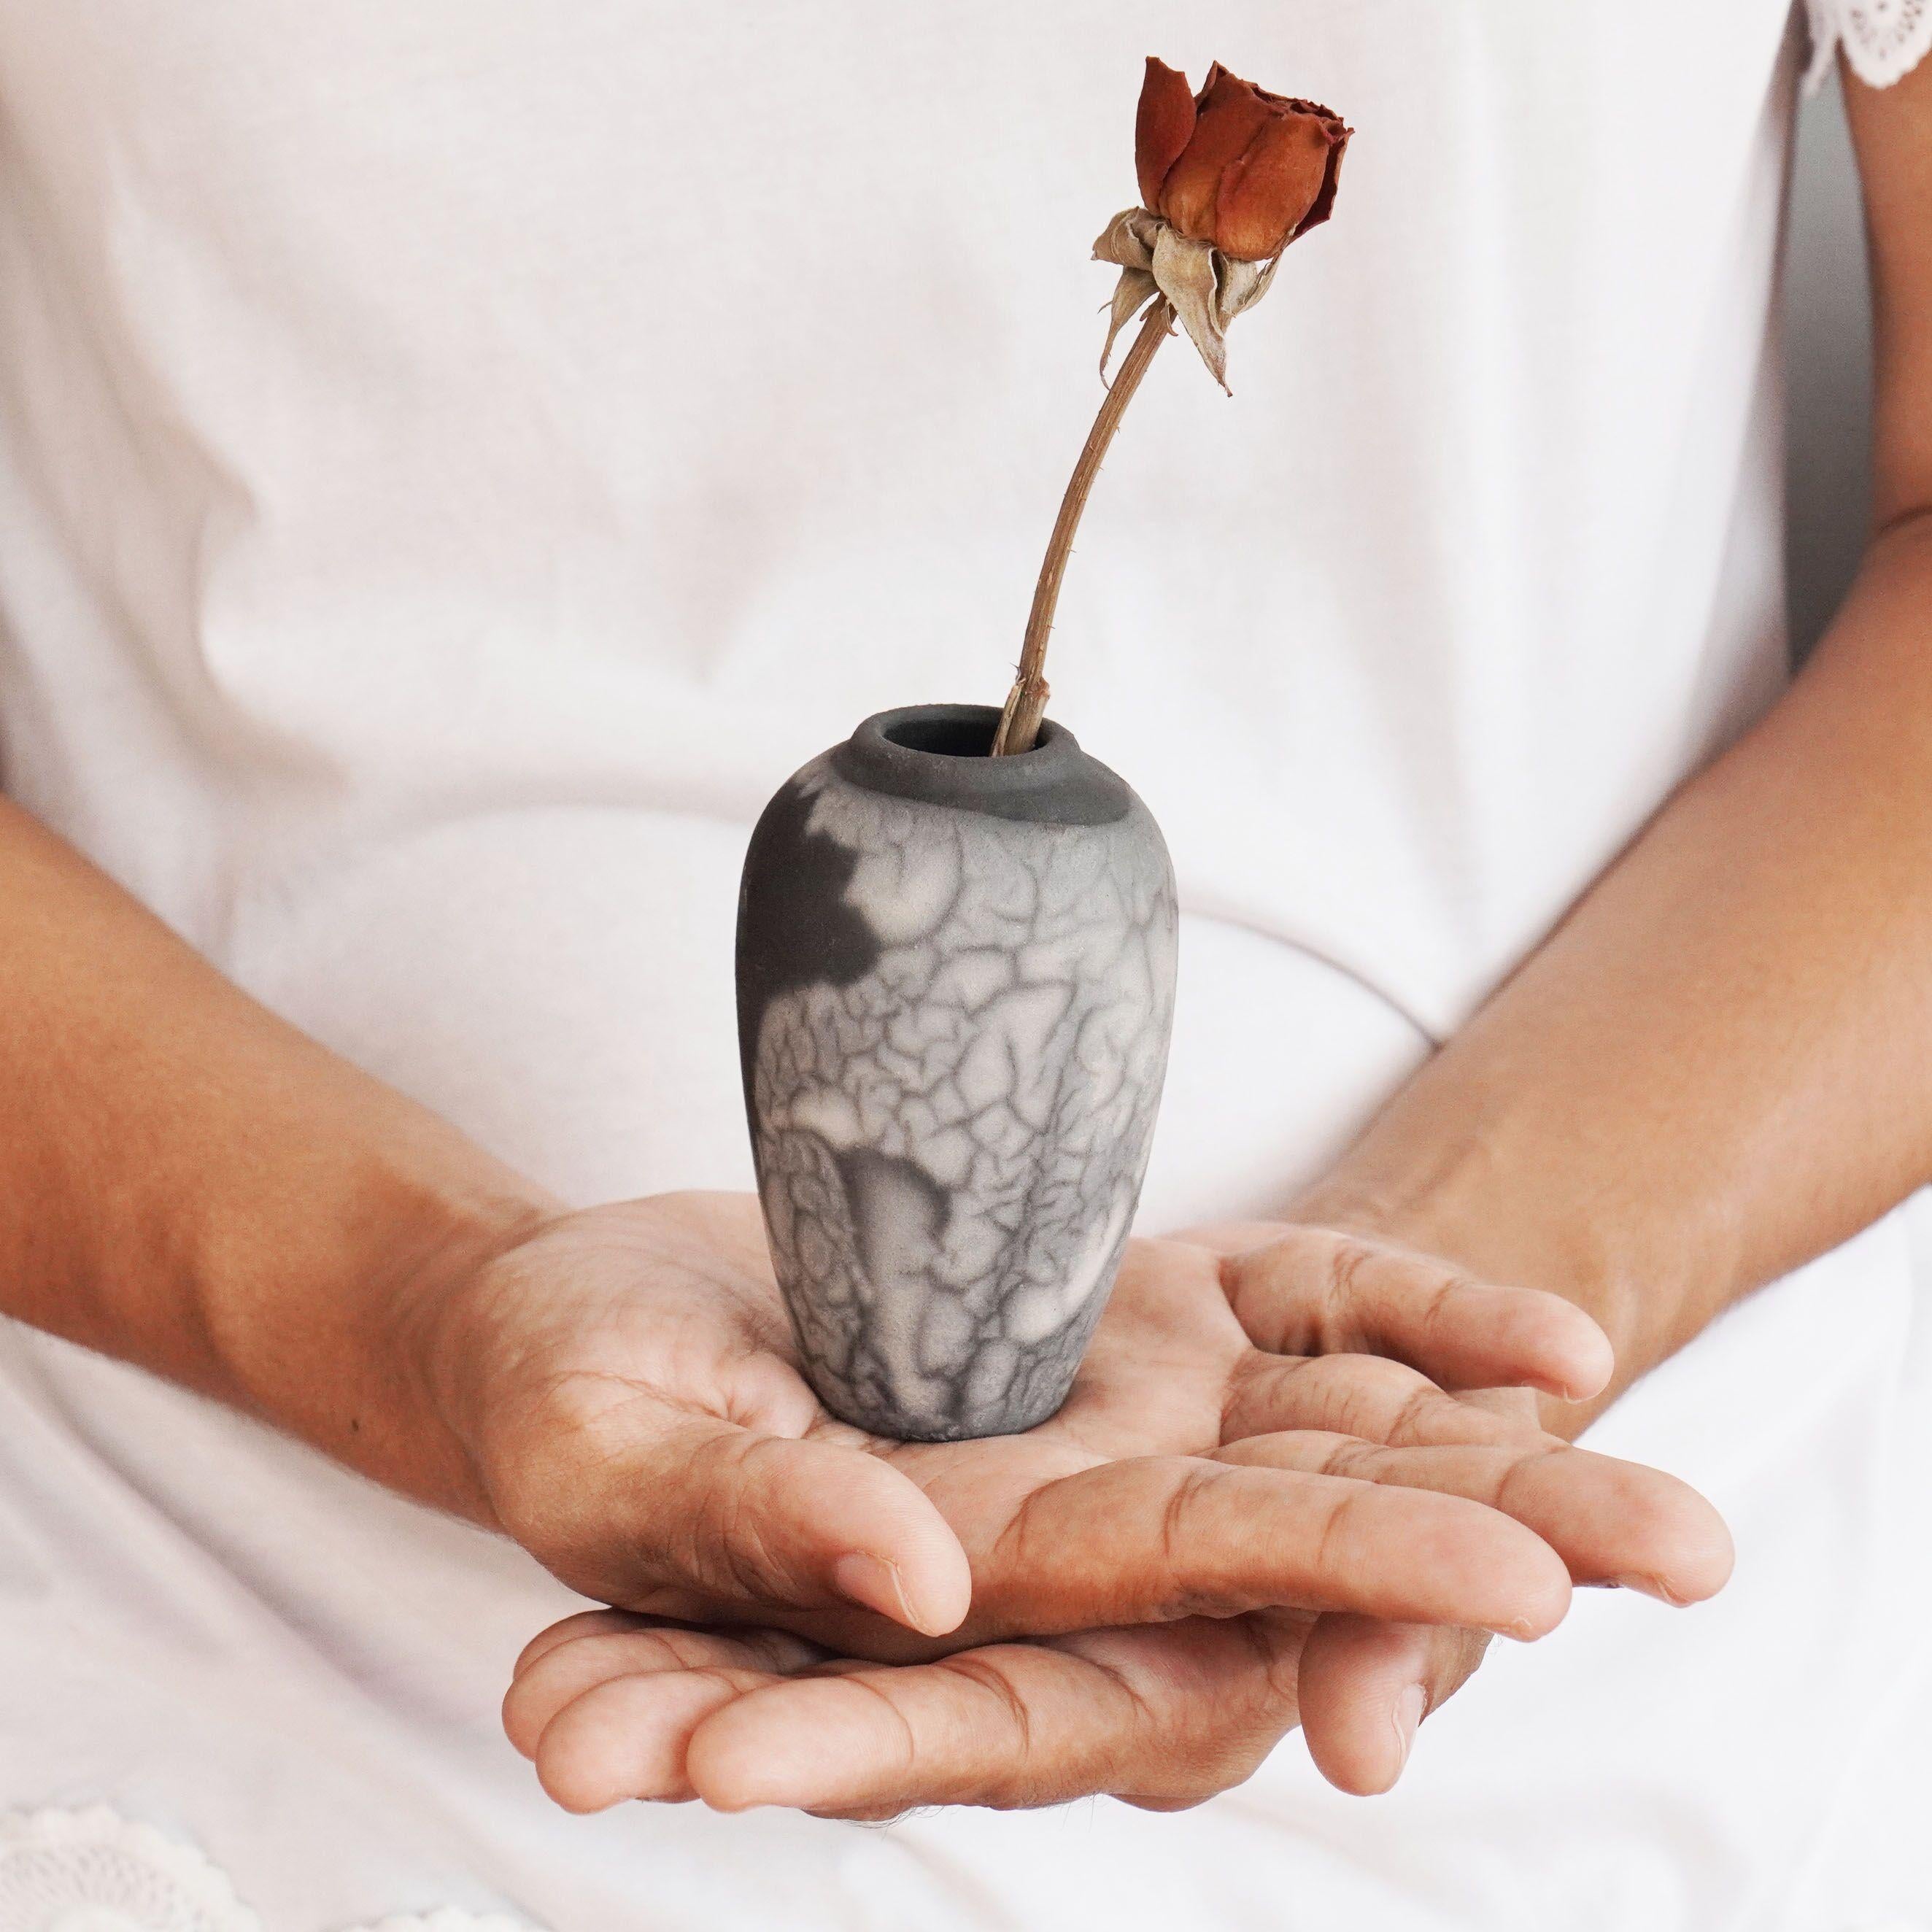 Hana L ~ 花 flower 

Our Hana L mini raku vase represents a miniature urn with a bulbous top tapers slenderly to a smaller base. This vase makes for an adorable gift or a tabletop decorative piece that truly stands out. Each piece is individually